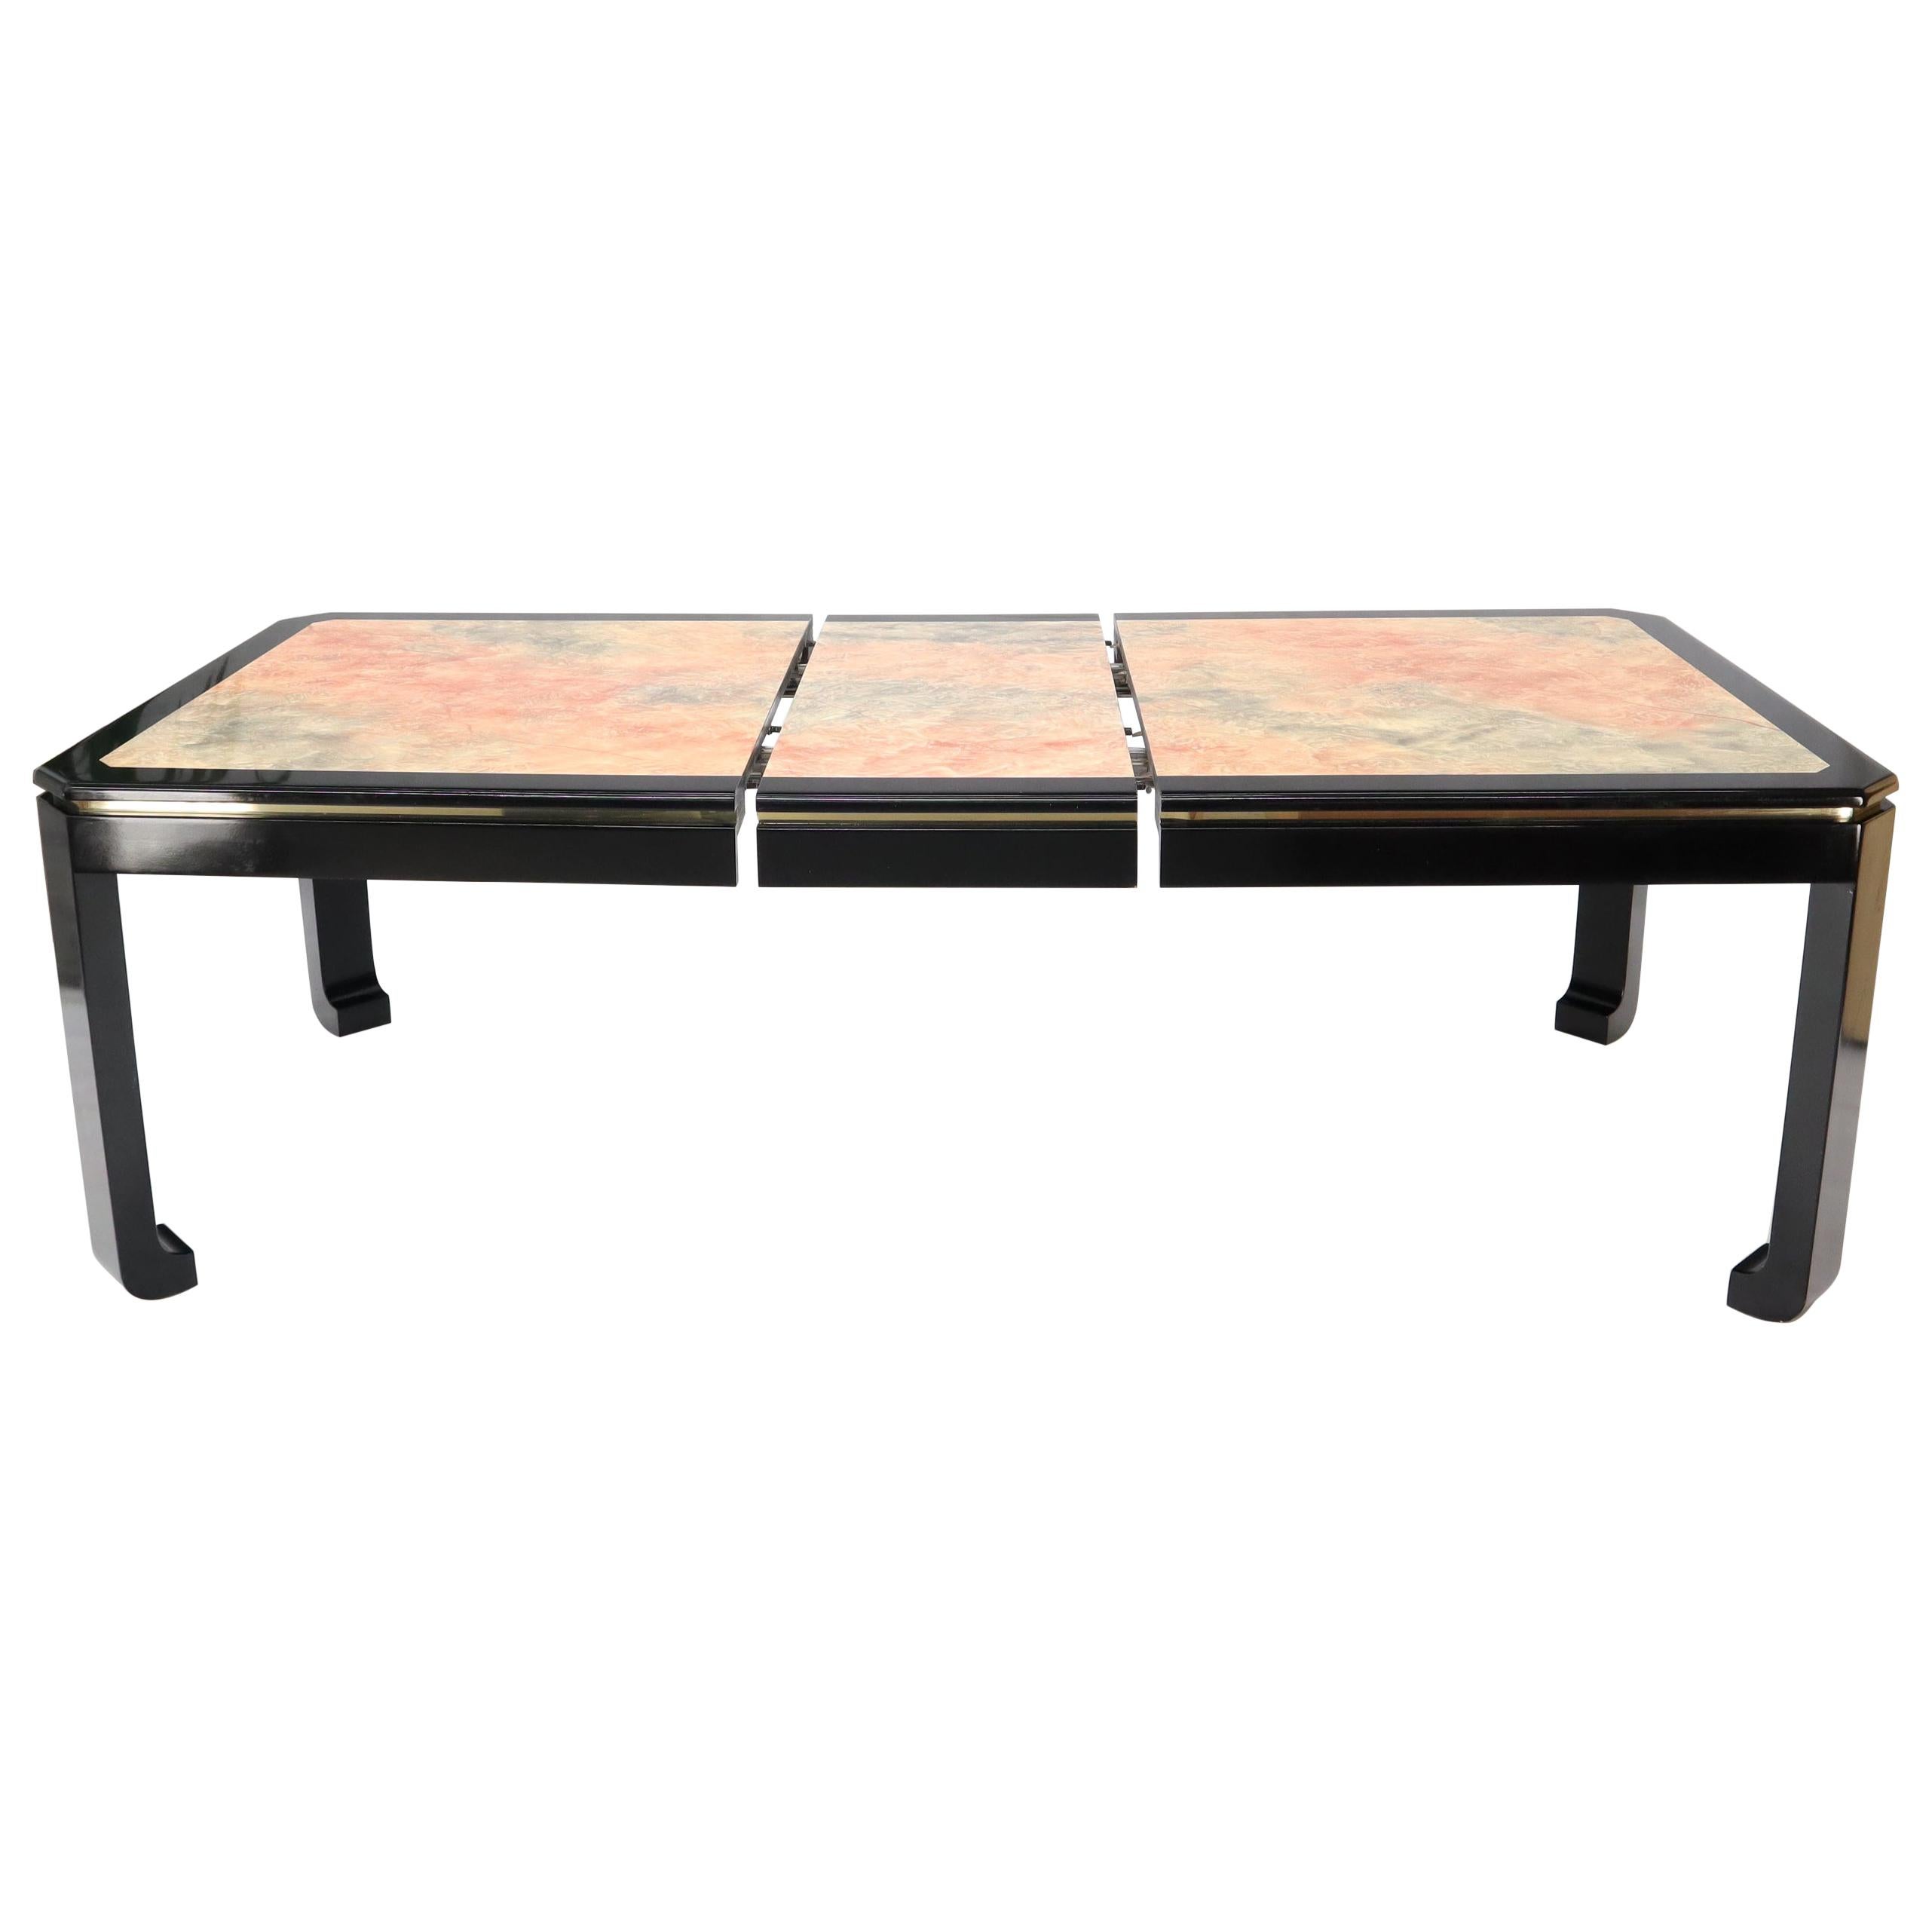 Black Lacquer Faux Stone Marble Finish Dining Table with Leave Extension Board For Sale